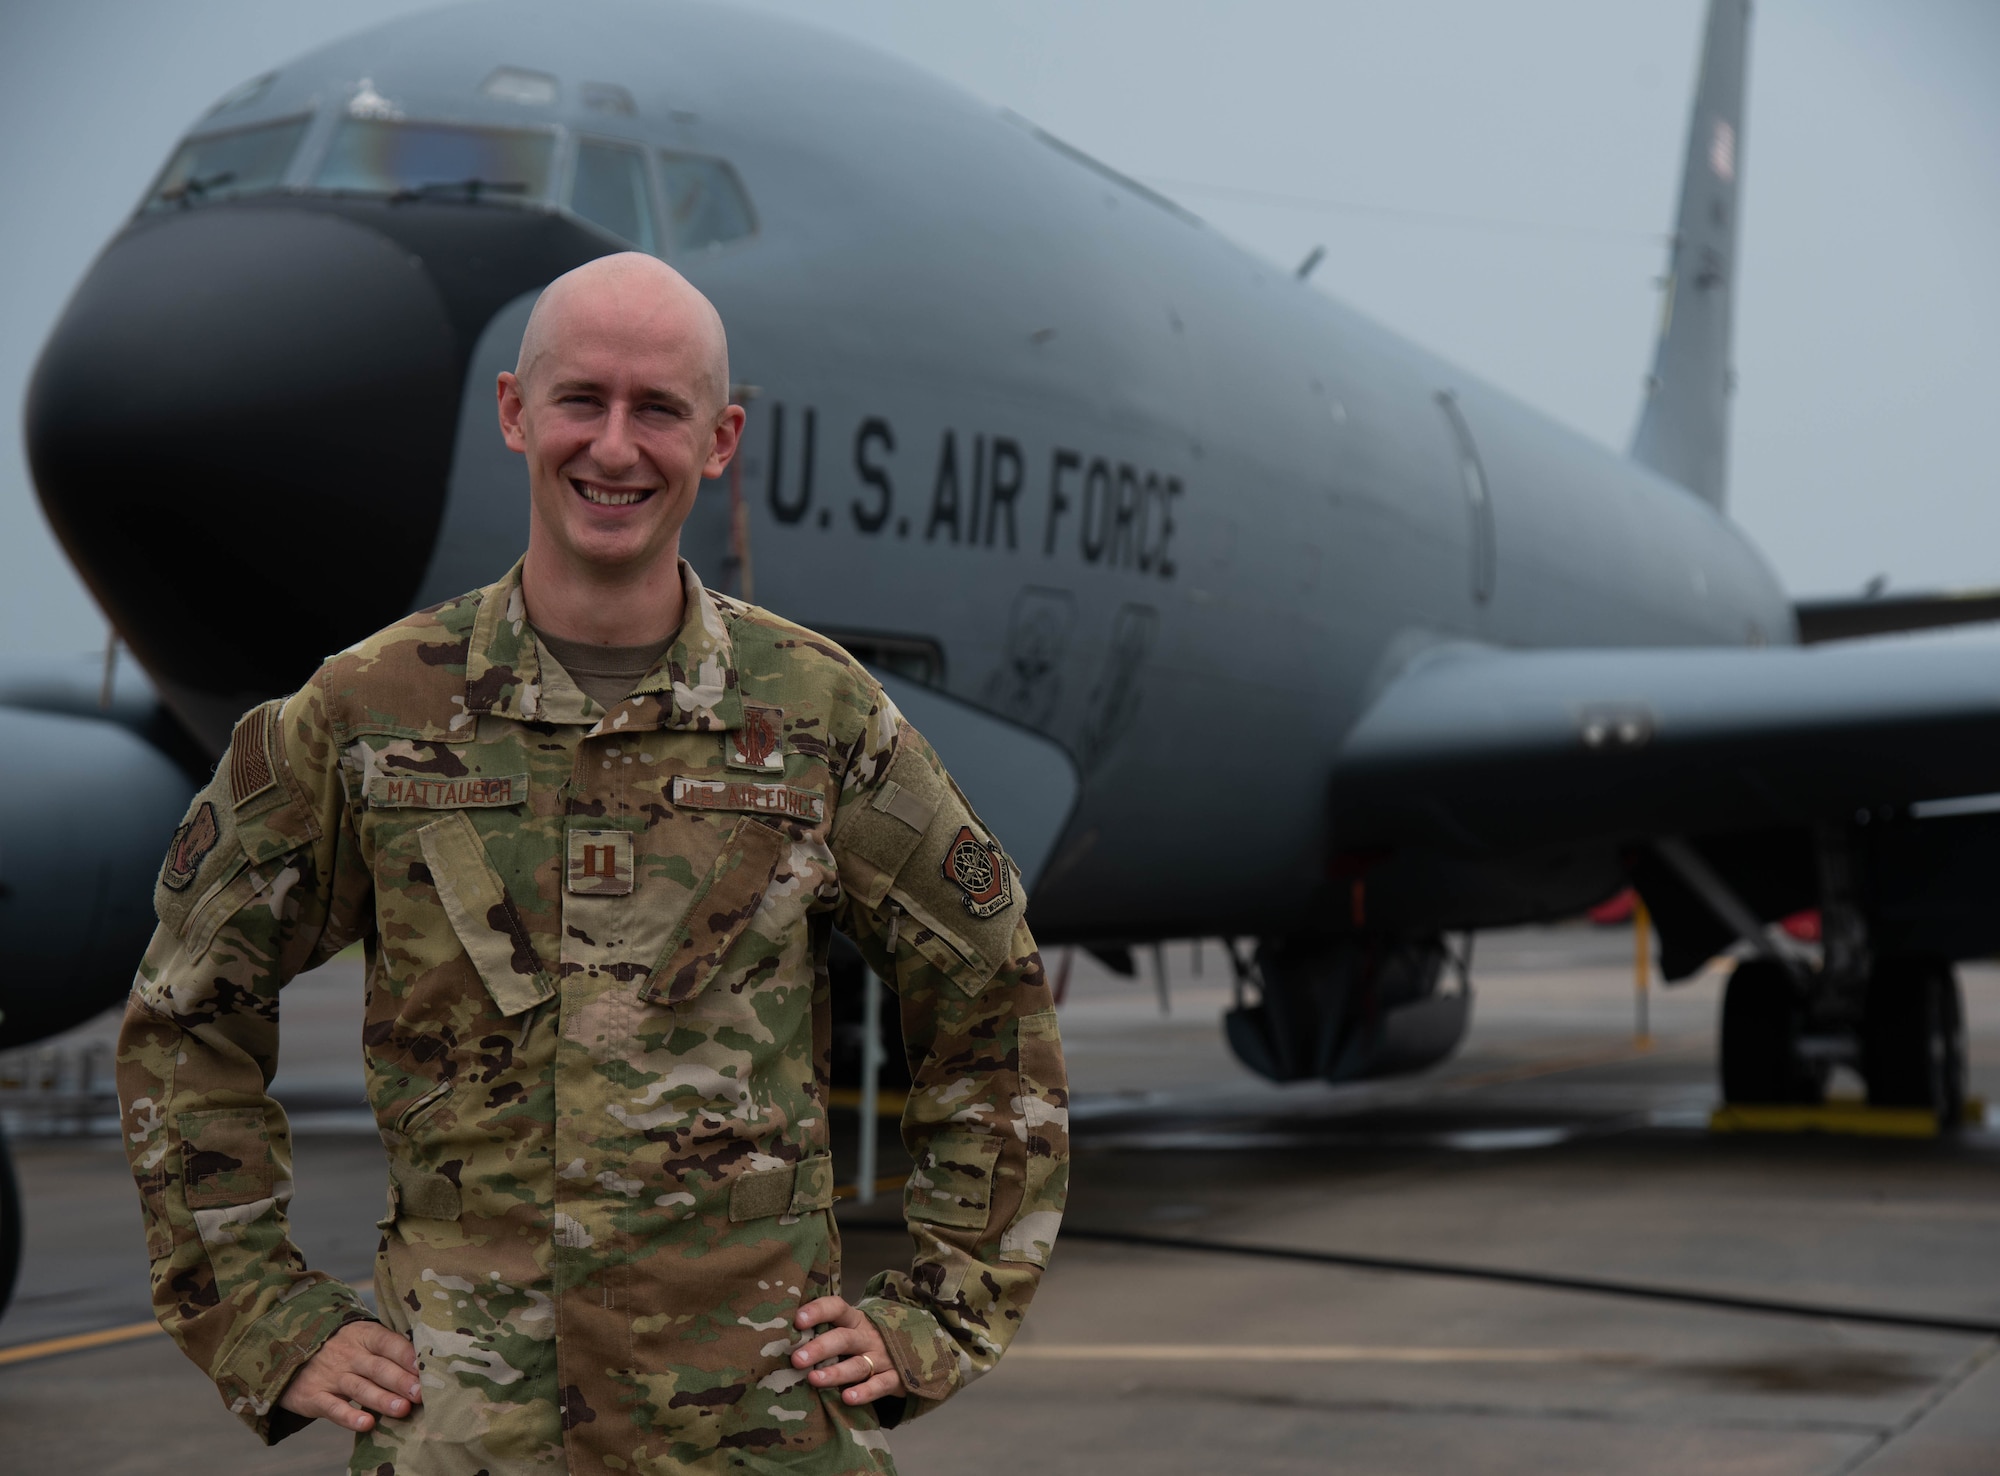 U.S. Air Force Capt. Spencer Mattausch, 6th Air Refueling Wing plans and programs officer, poses in front of a 6th Air Refueling Wing KC-135 Startotanker aircraft on the MacDill Air Force Base flight line Oct. 25, 2021. Mattausch, temporarily assigned to the 91st Air Refueling Squadron for the next two years, is training, certifying and modernizing how the 91st ARS prepares for nuclear generation as part of Air Force Global Strike Command’s Striker Phoenix program to assist in the integration of war planning efforts between AFGSC and Air Mobility Command. (U.S. Air Force photo by Airman 1st Class Lauren Cobin)